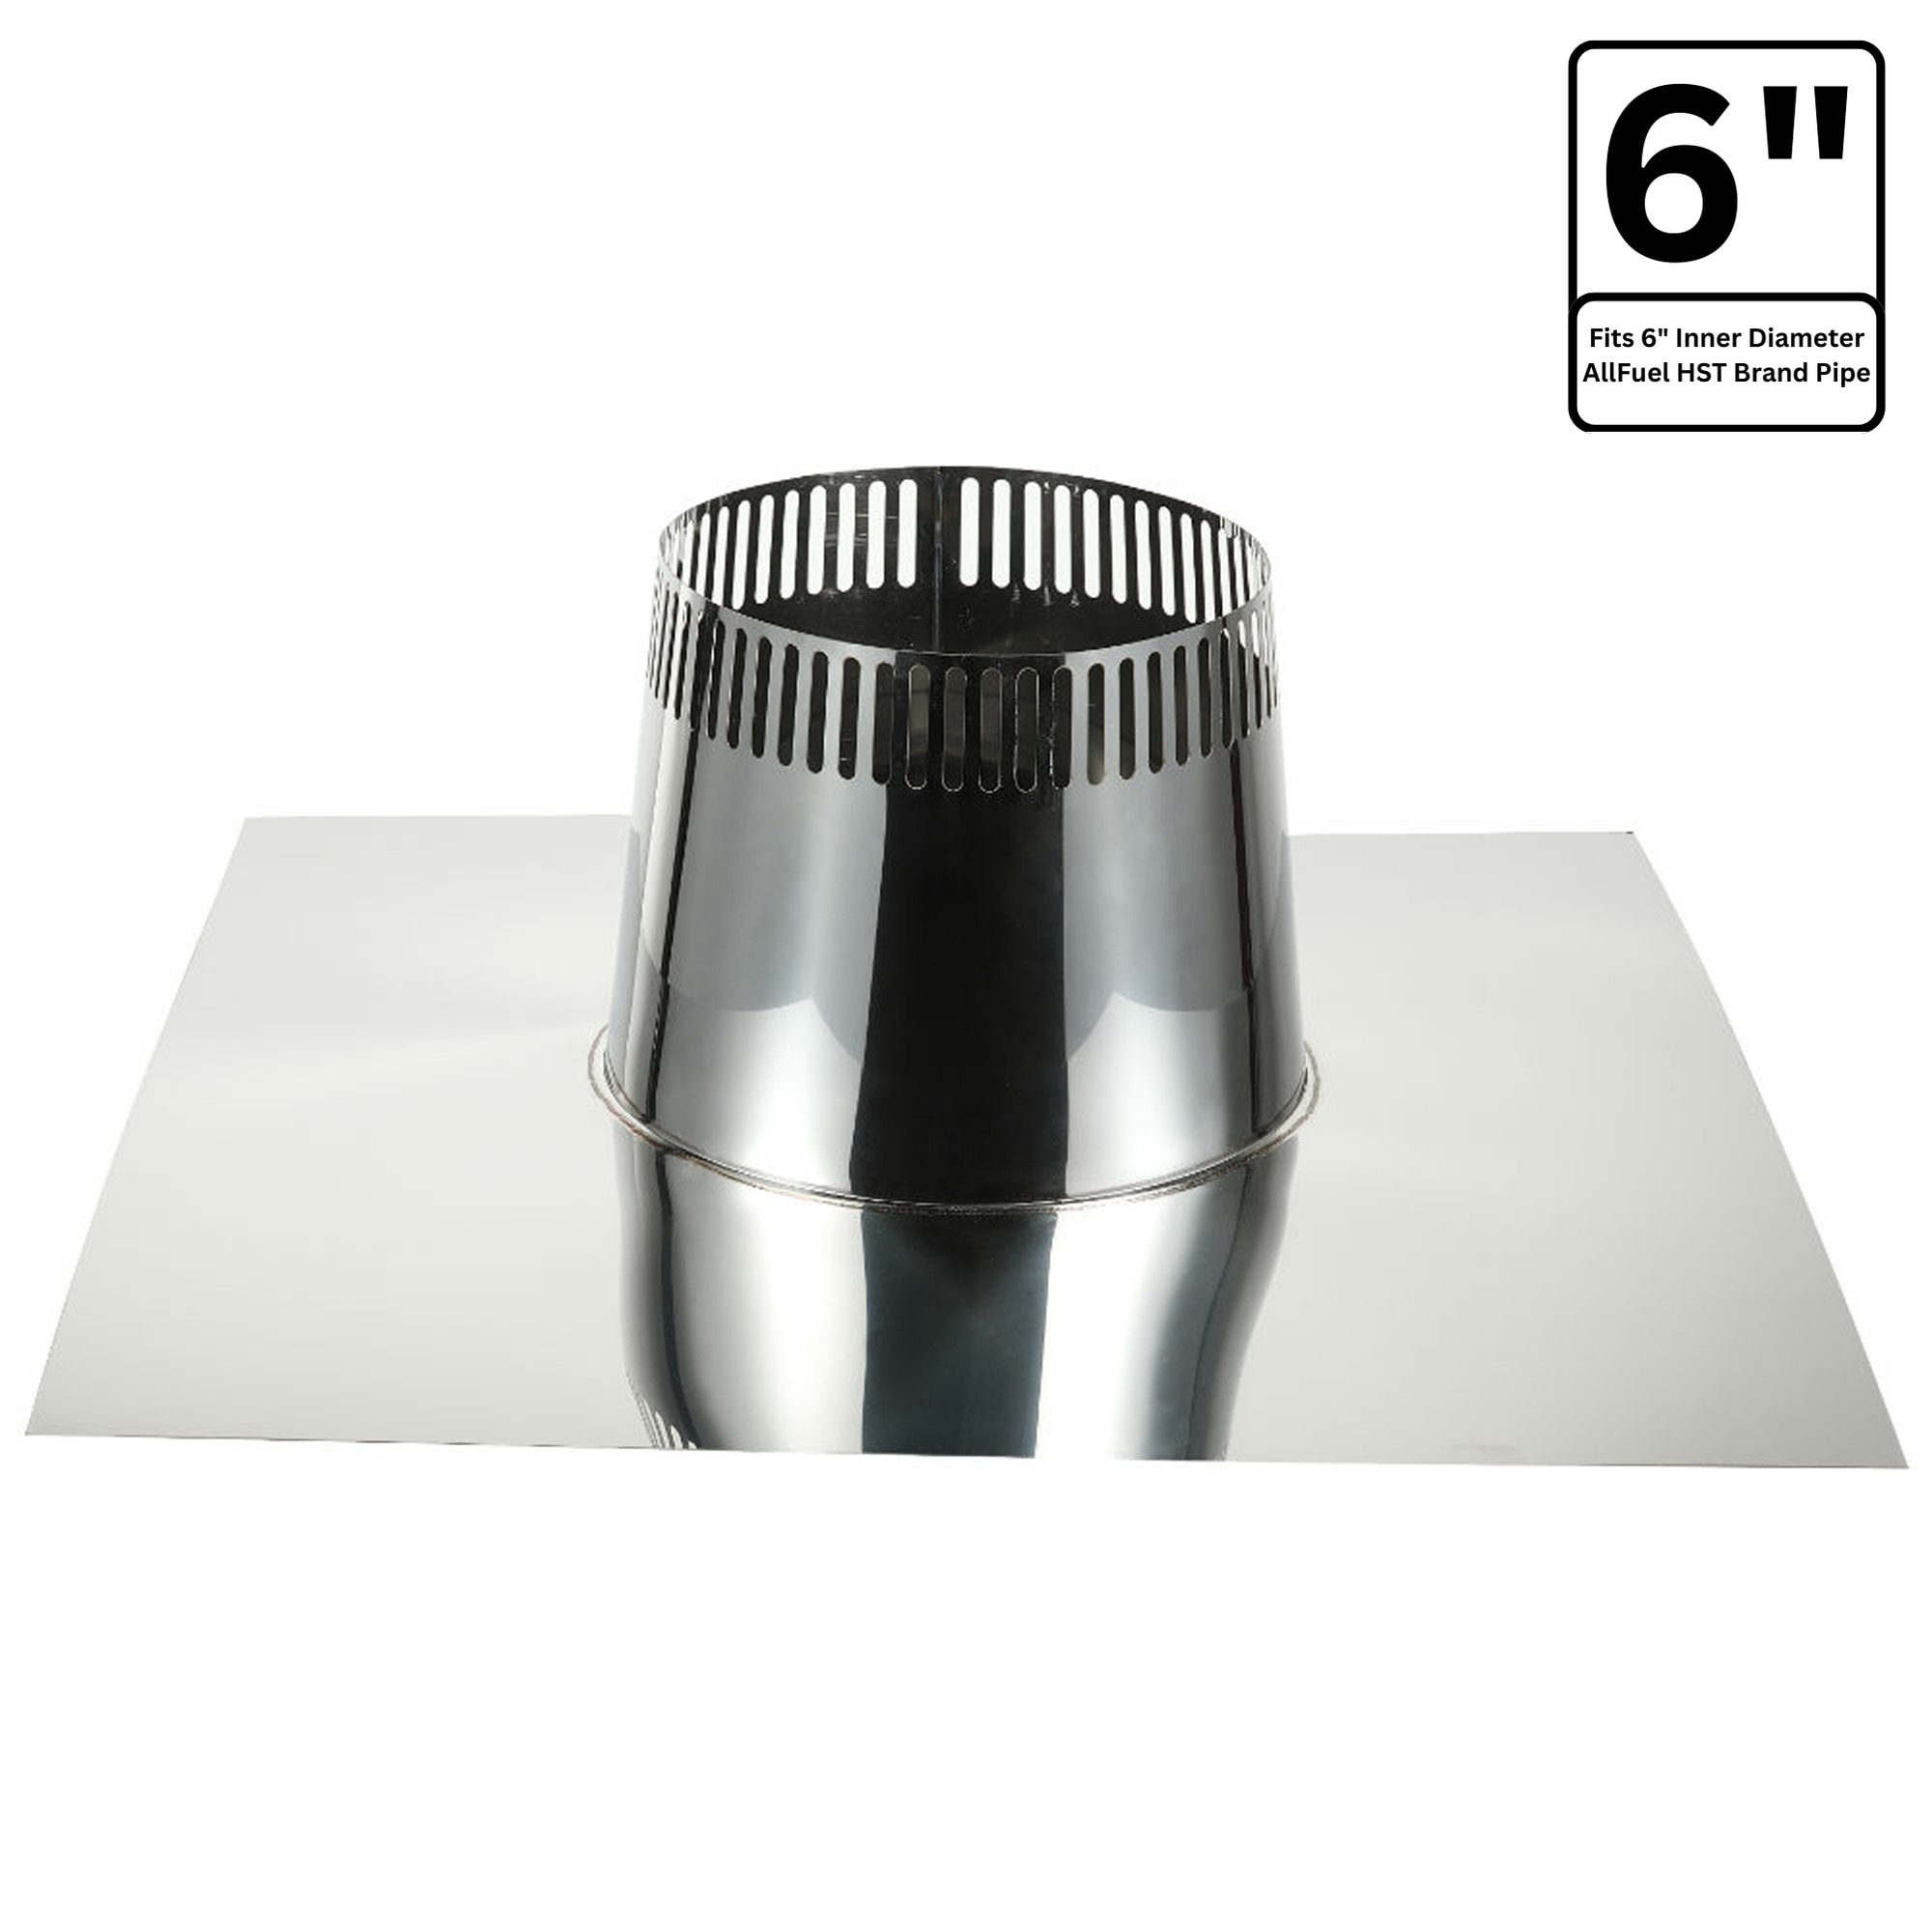 AllFuel HST Stove Pipe Adaptor for 6 Diameter 304 Stainless Steel All Fuel  Class-A Double Wall Insulated Chimney Pipe 